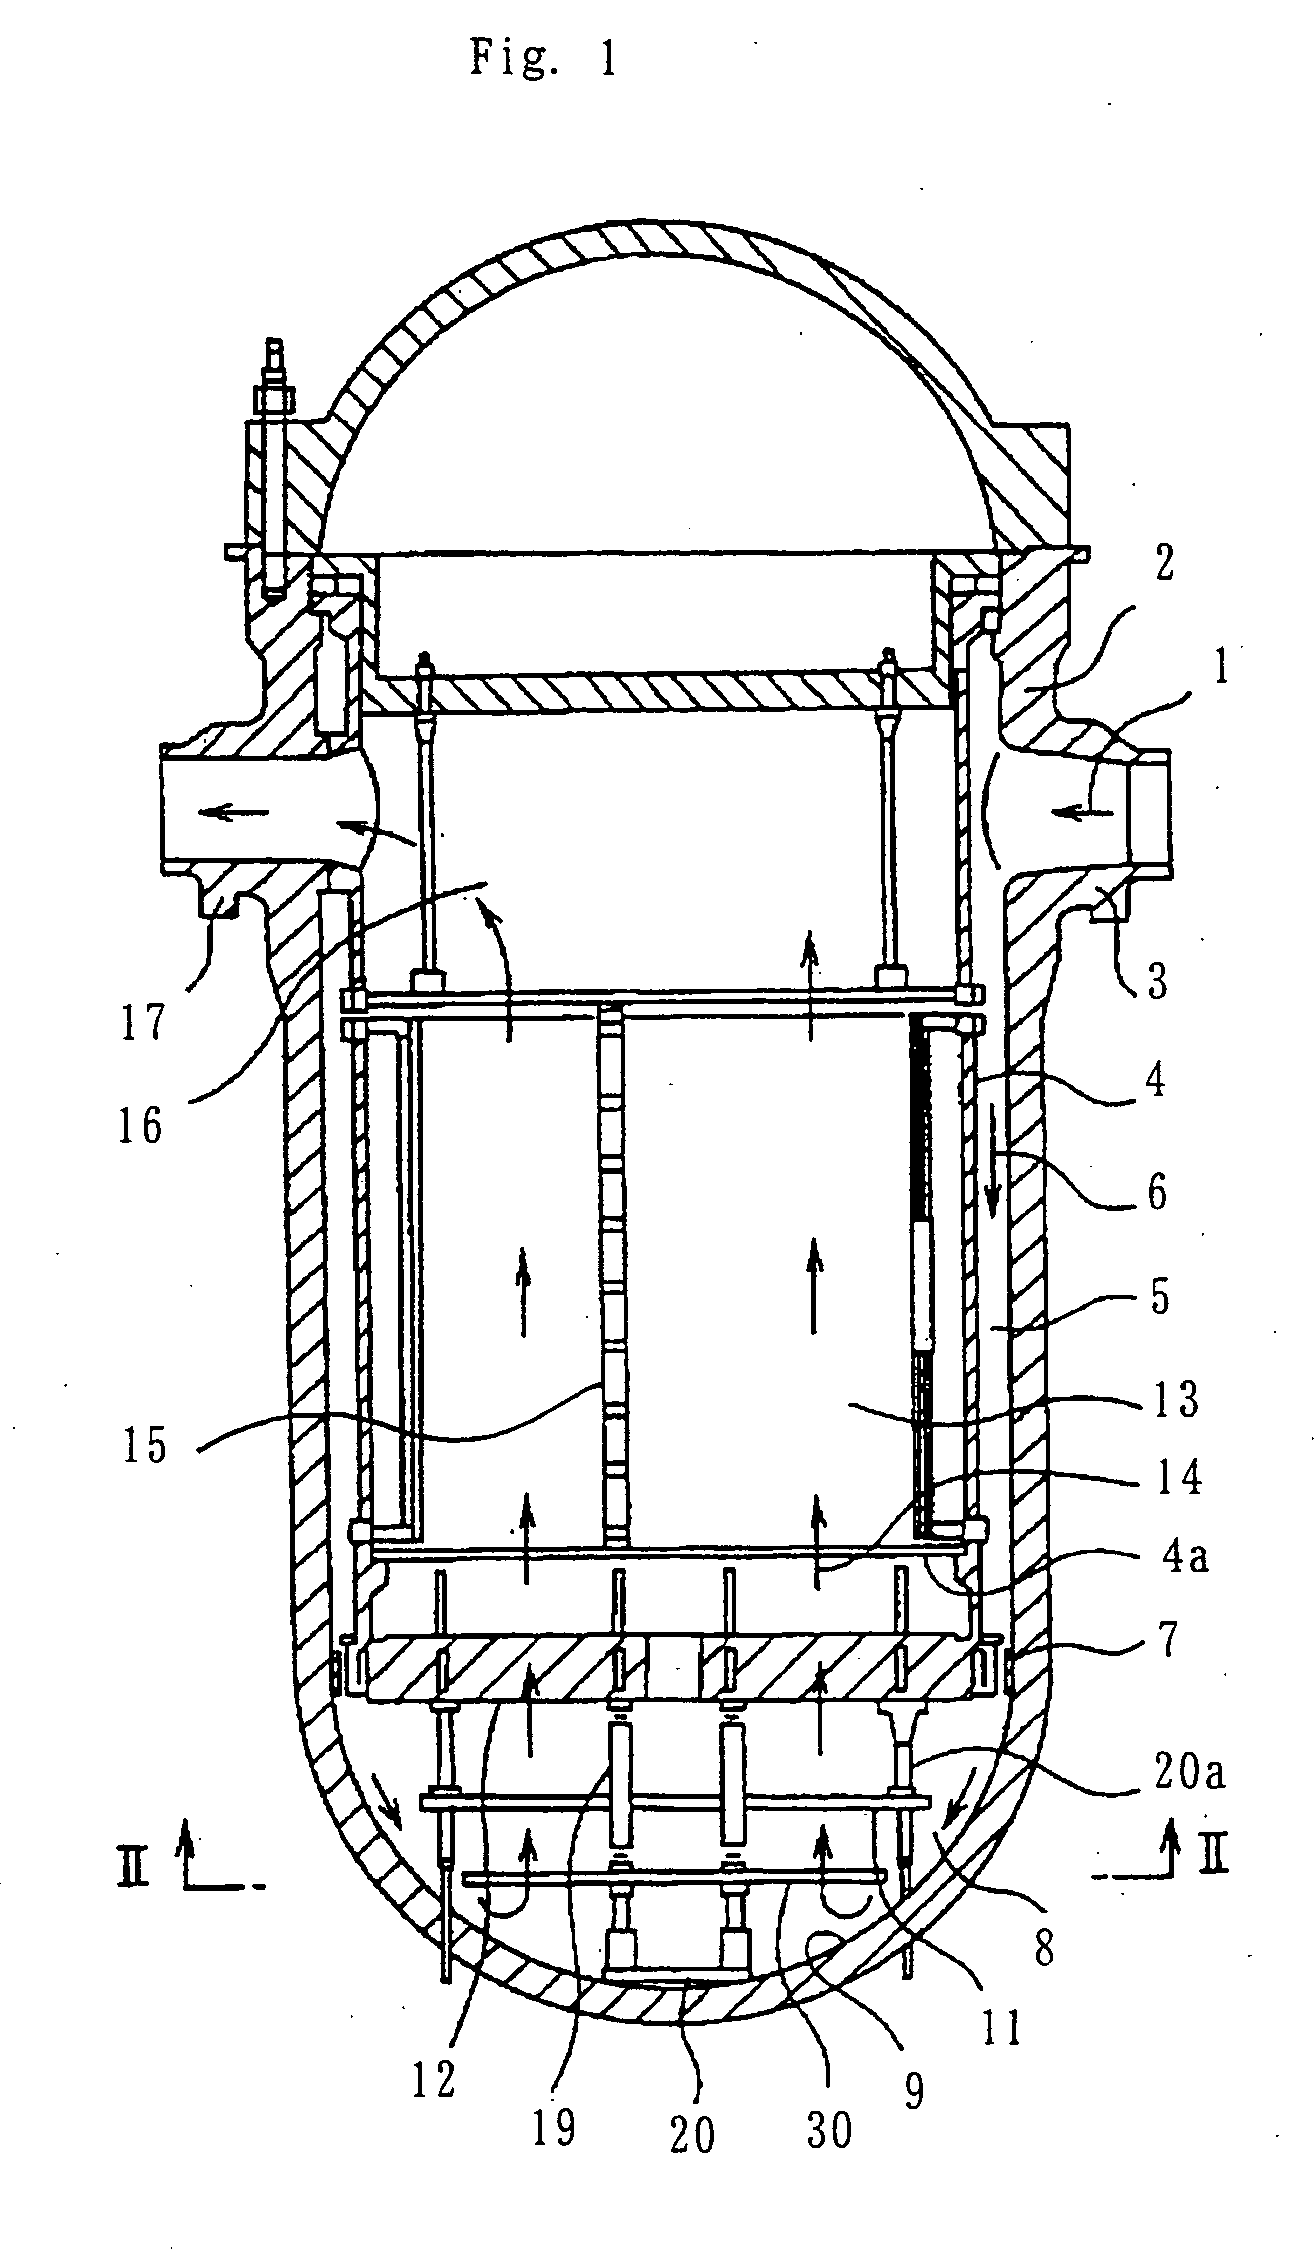 Nuclear reactor internal structure